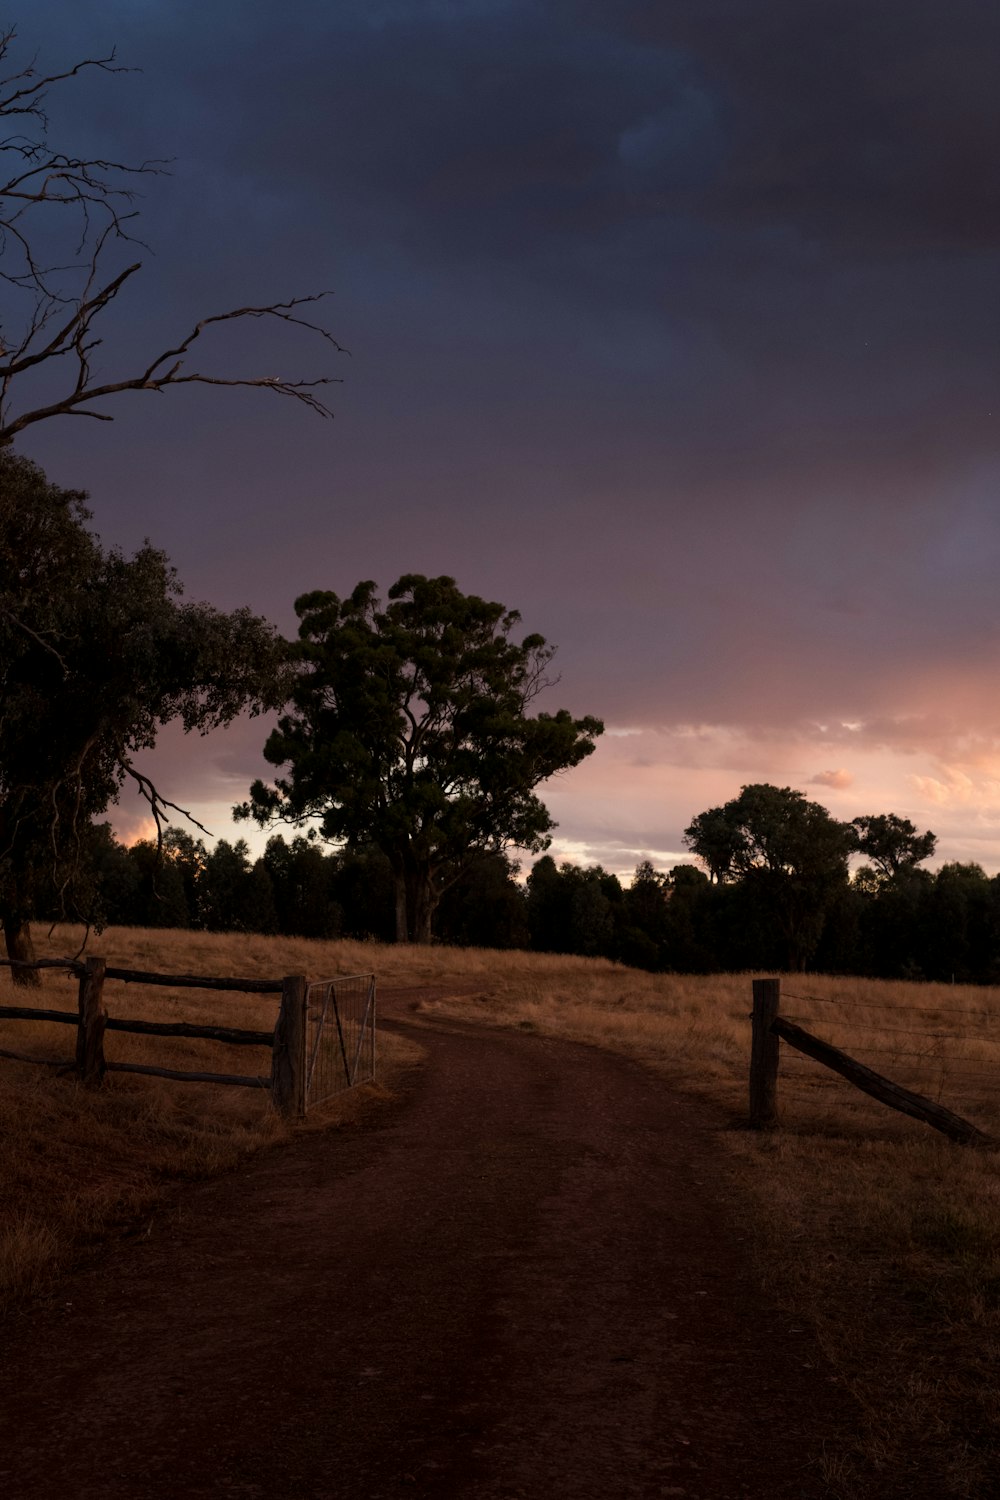 a dirt road with a fence and trees in the background